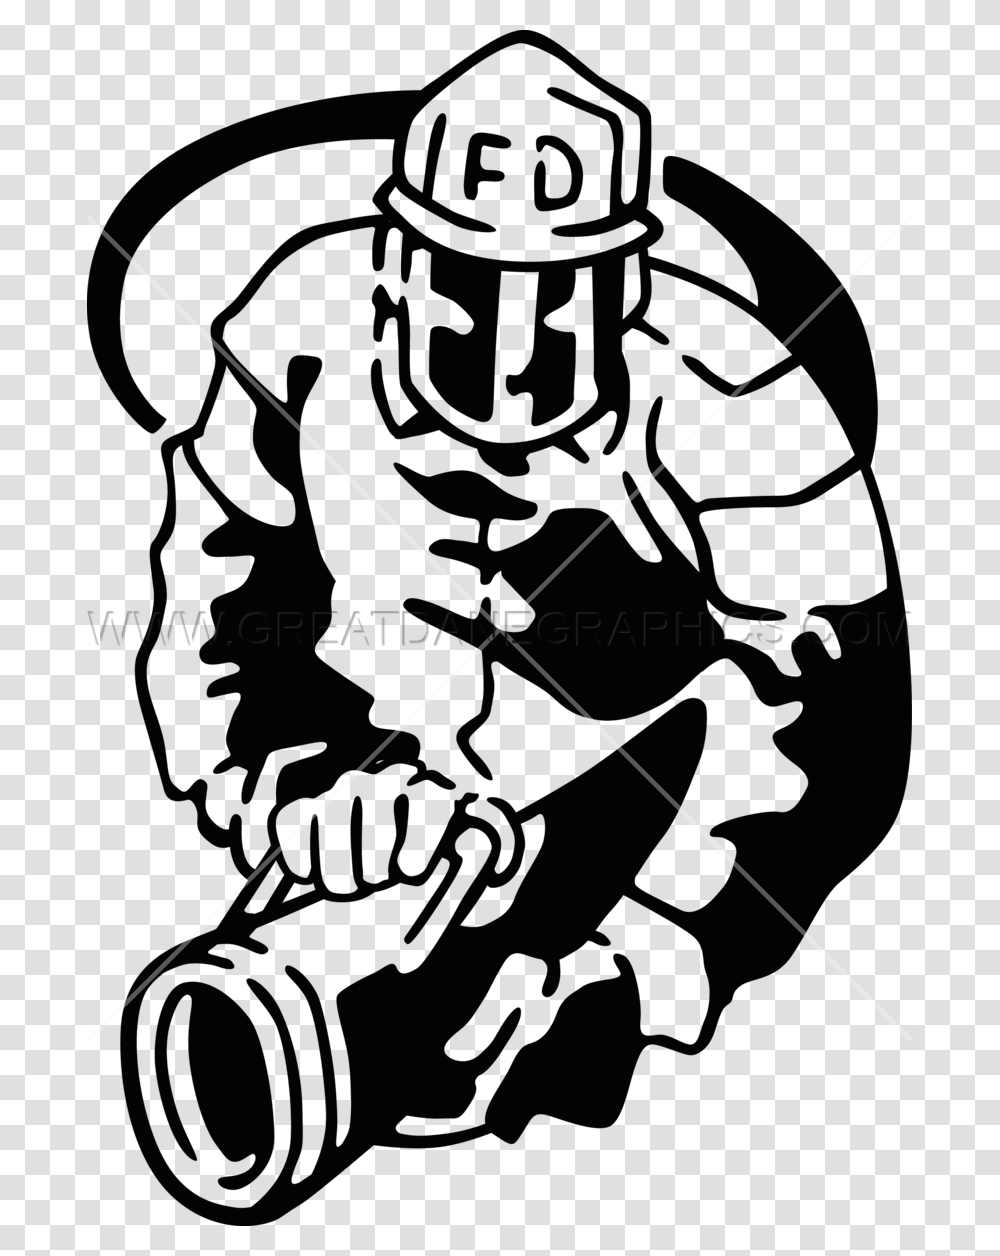 Firefighter Clipart Hose Silhouette Fireman Holding Hose Clipart Black And White, Military Uniform Transparent Png